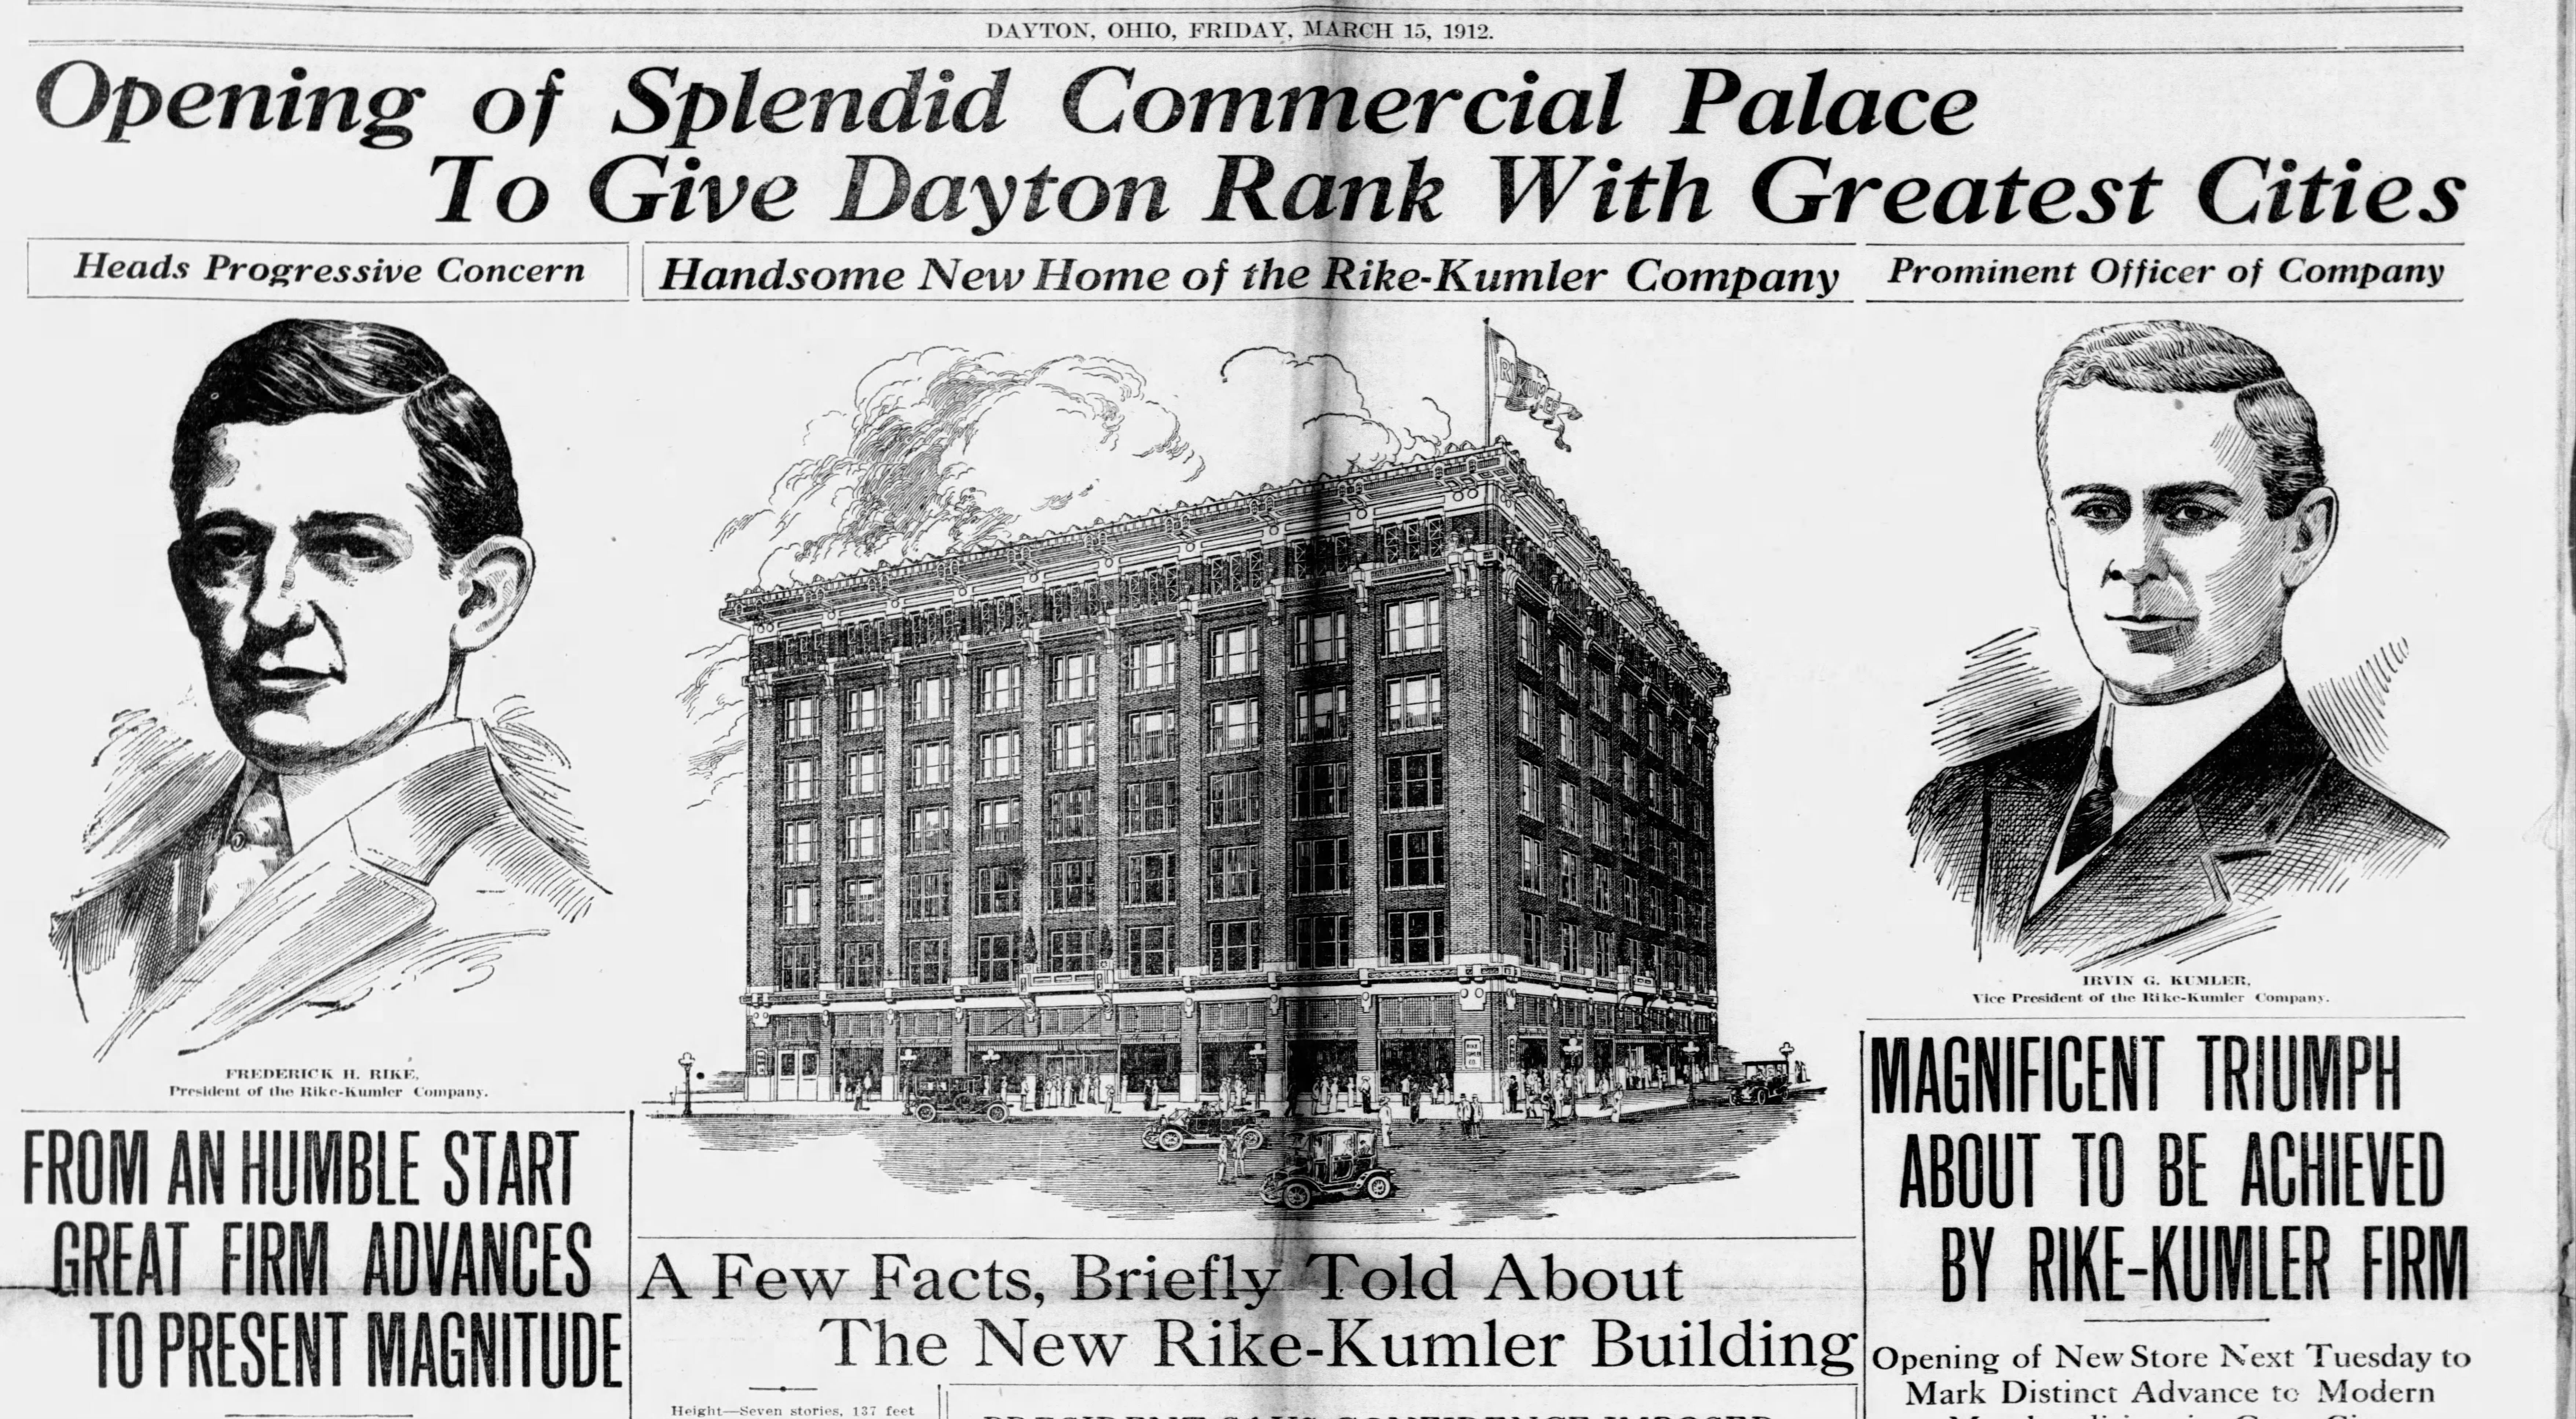 Rike's Department Store: The history of a Dayton legend that